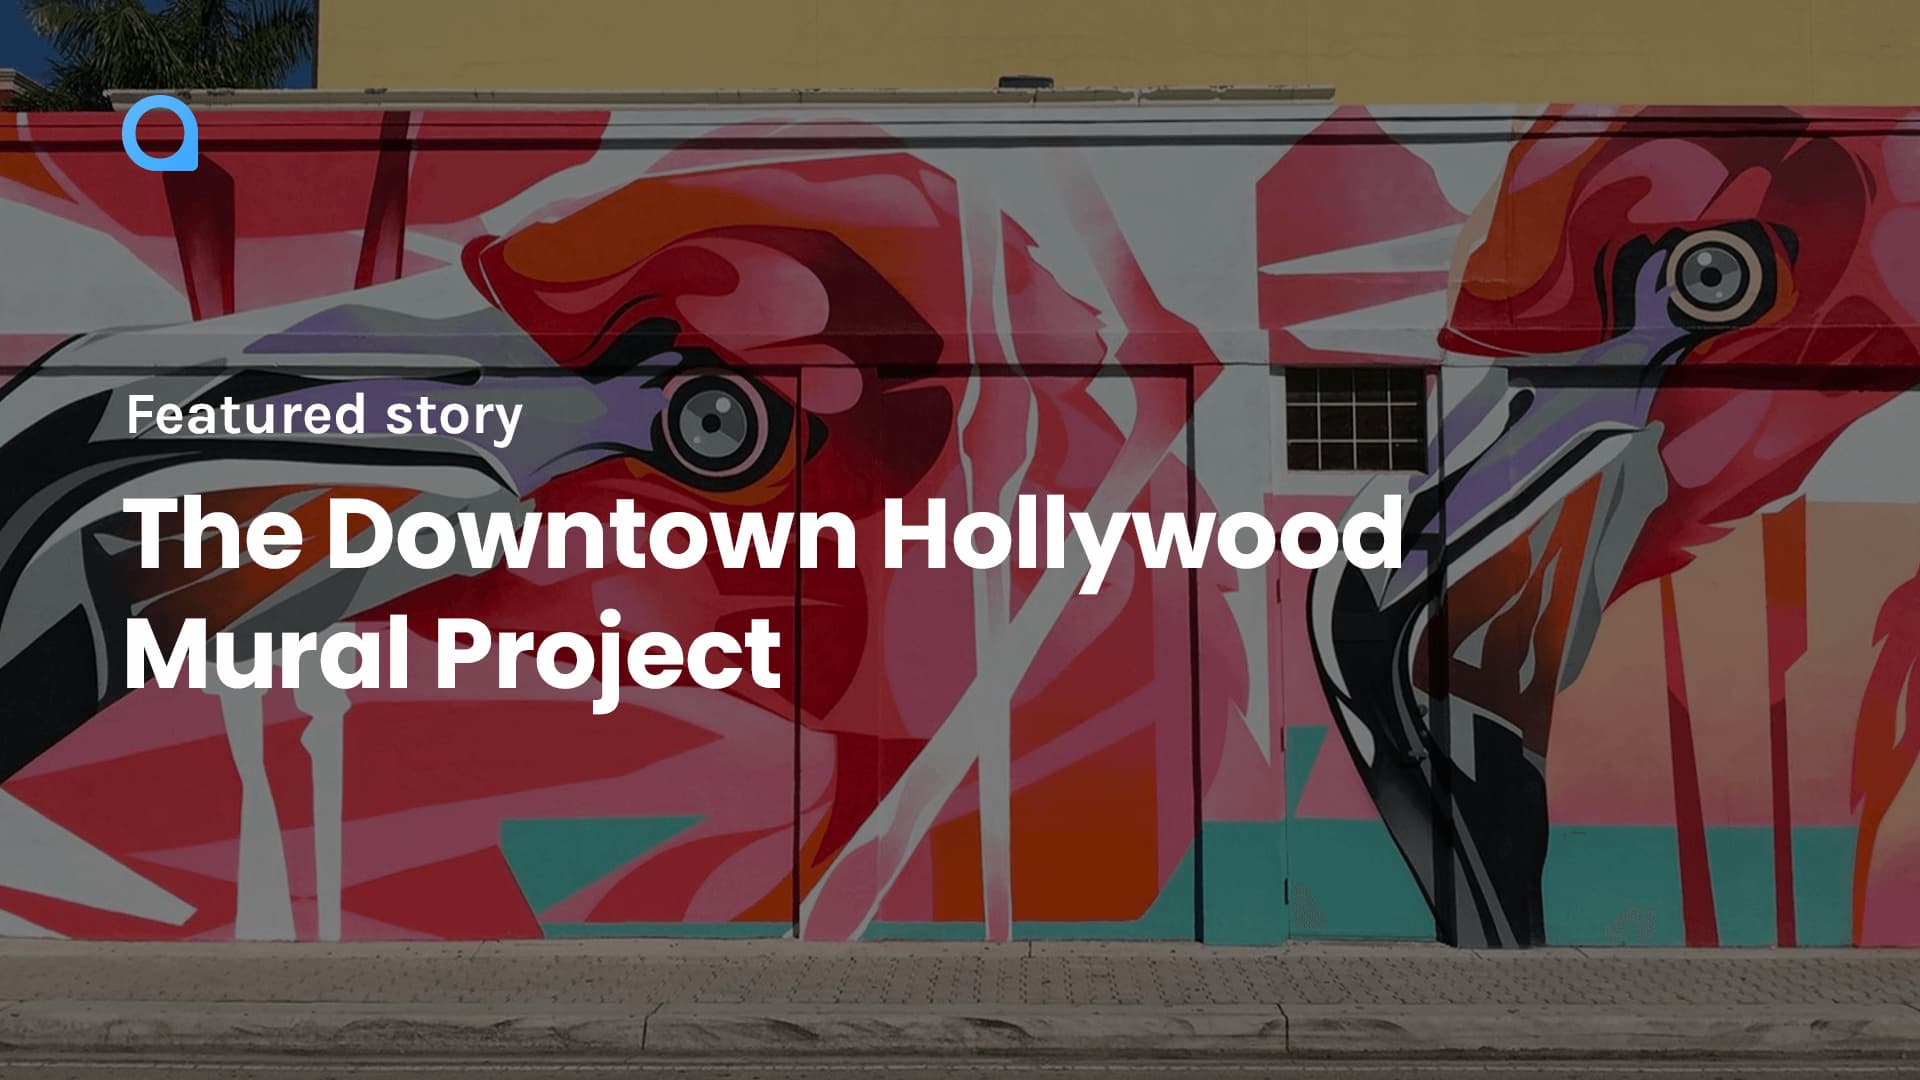 The Downtown Hollywood Mural Project